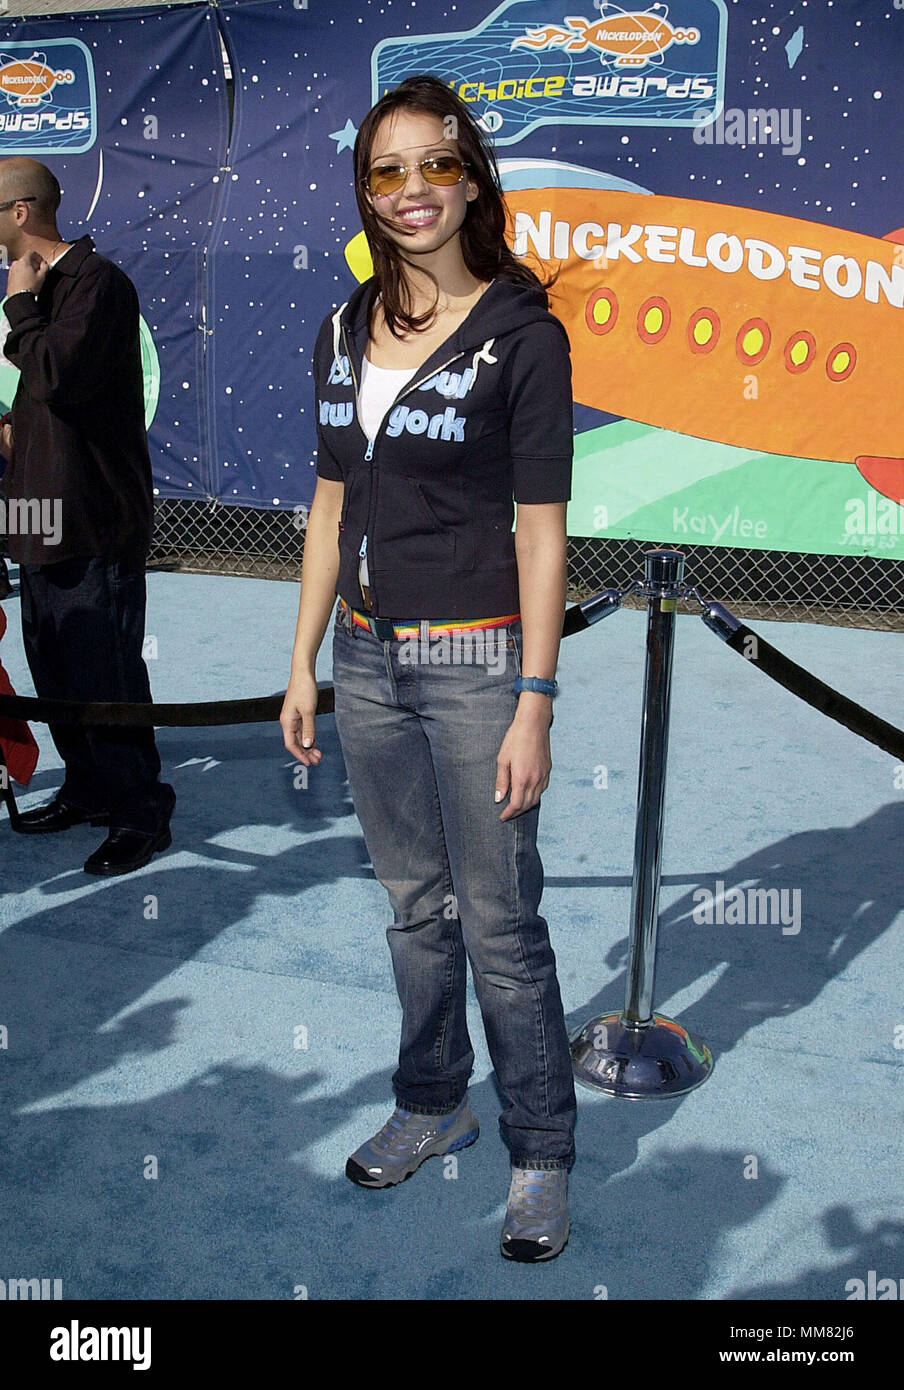 Jessica Alba - Dark Angel - arriving at The 14th Annual Kids Choice Awards from NickelOdeon at the Barker Hangar in Santa Monica, Los Angeles  4/21/2001  AlbaJessica DarkAngel05.JPGAlbaJessica DarkAngel05 Red Carpet Event, Vertical, USA, Film Industry, Celebrities,  Photography, Bestof, Arts Culture and Entertainment, Topix Celebrities fashion /  Vertical, Best of, Event in Hollywood Life - California,  Red Carpet and backstage, USA, Film Industry, Celebrities,  movie celebrities, TV celebrities, Music celebrities, Photography, Bestof, Arts Culture and Entertainment,  Topix, vertical, one pers Stock Photo